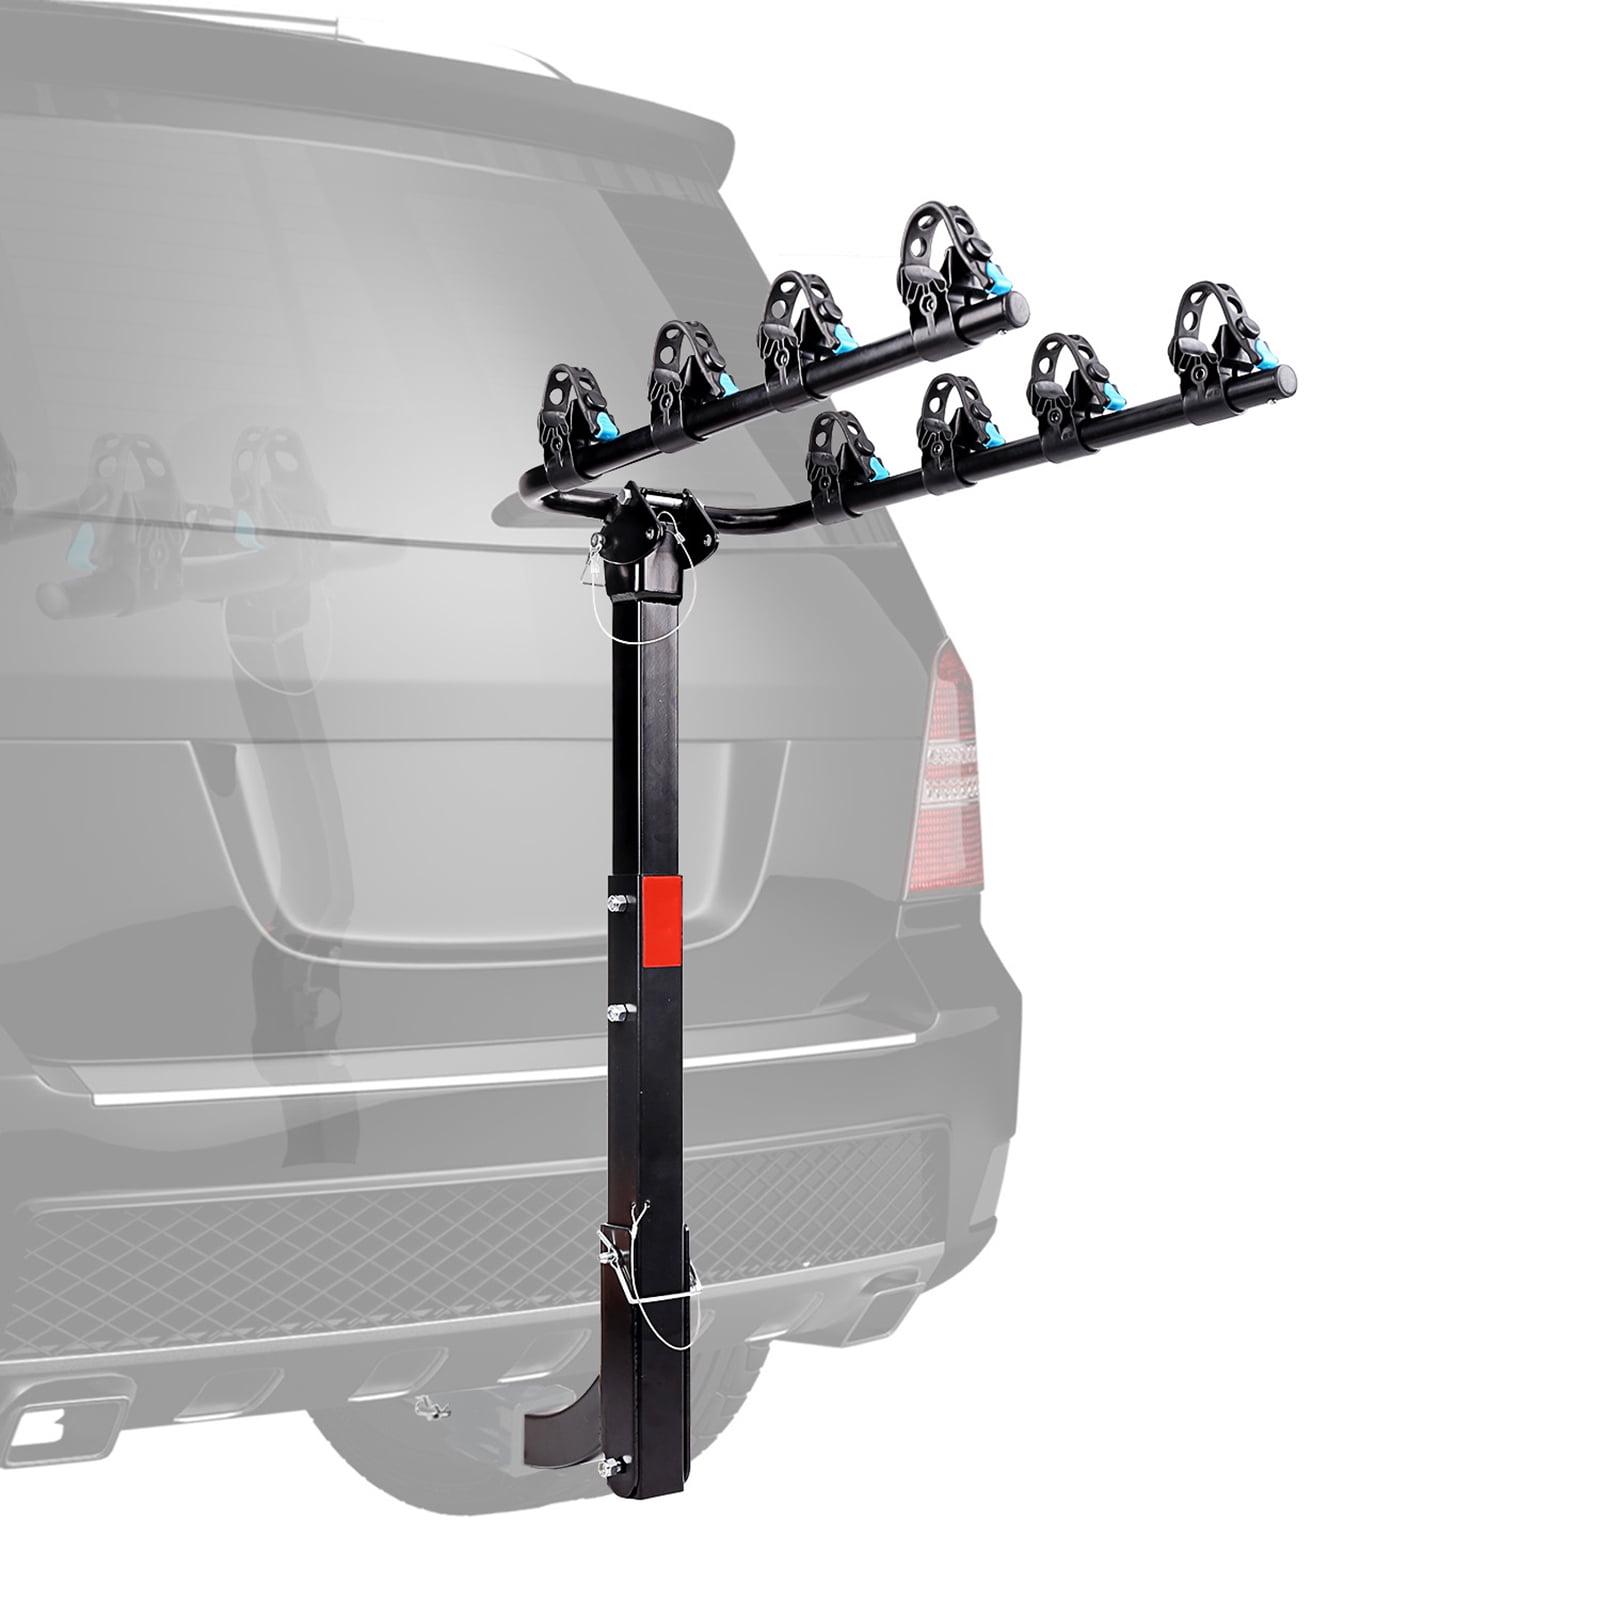 4 Bicycle Bike Hitch Mount Carrier Rack 2-Inch Receiver Car Truck Trailer Fits 4 